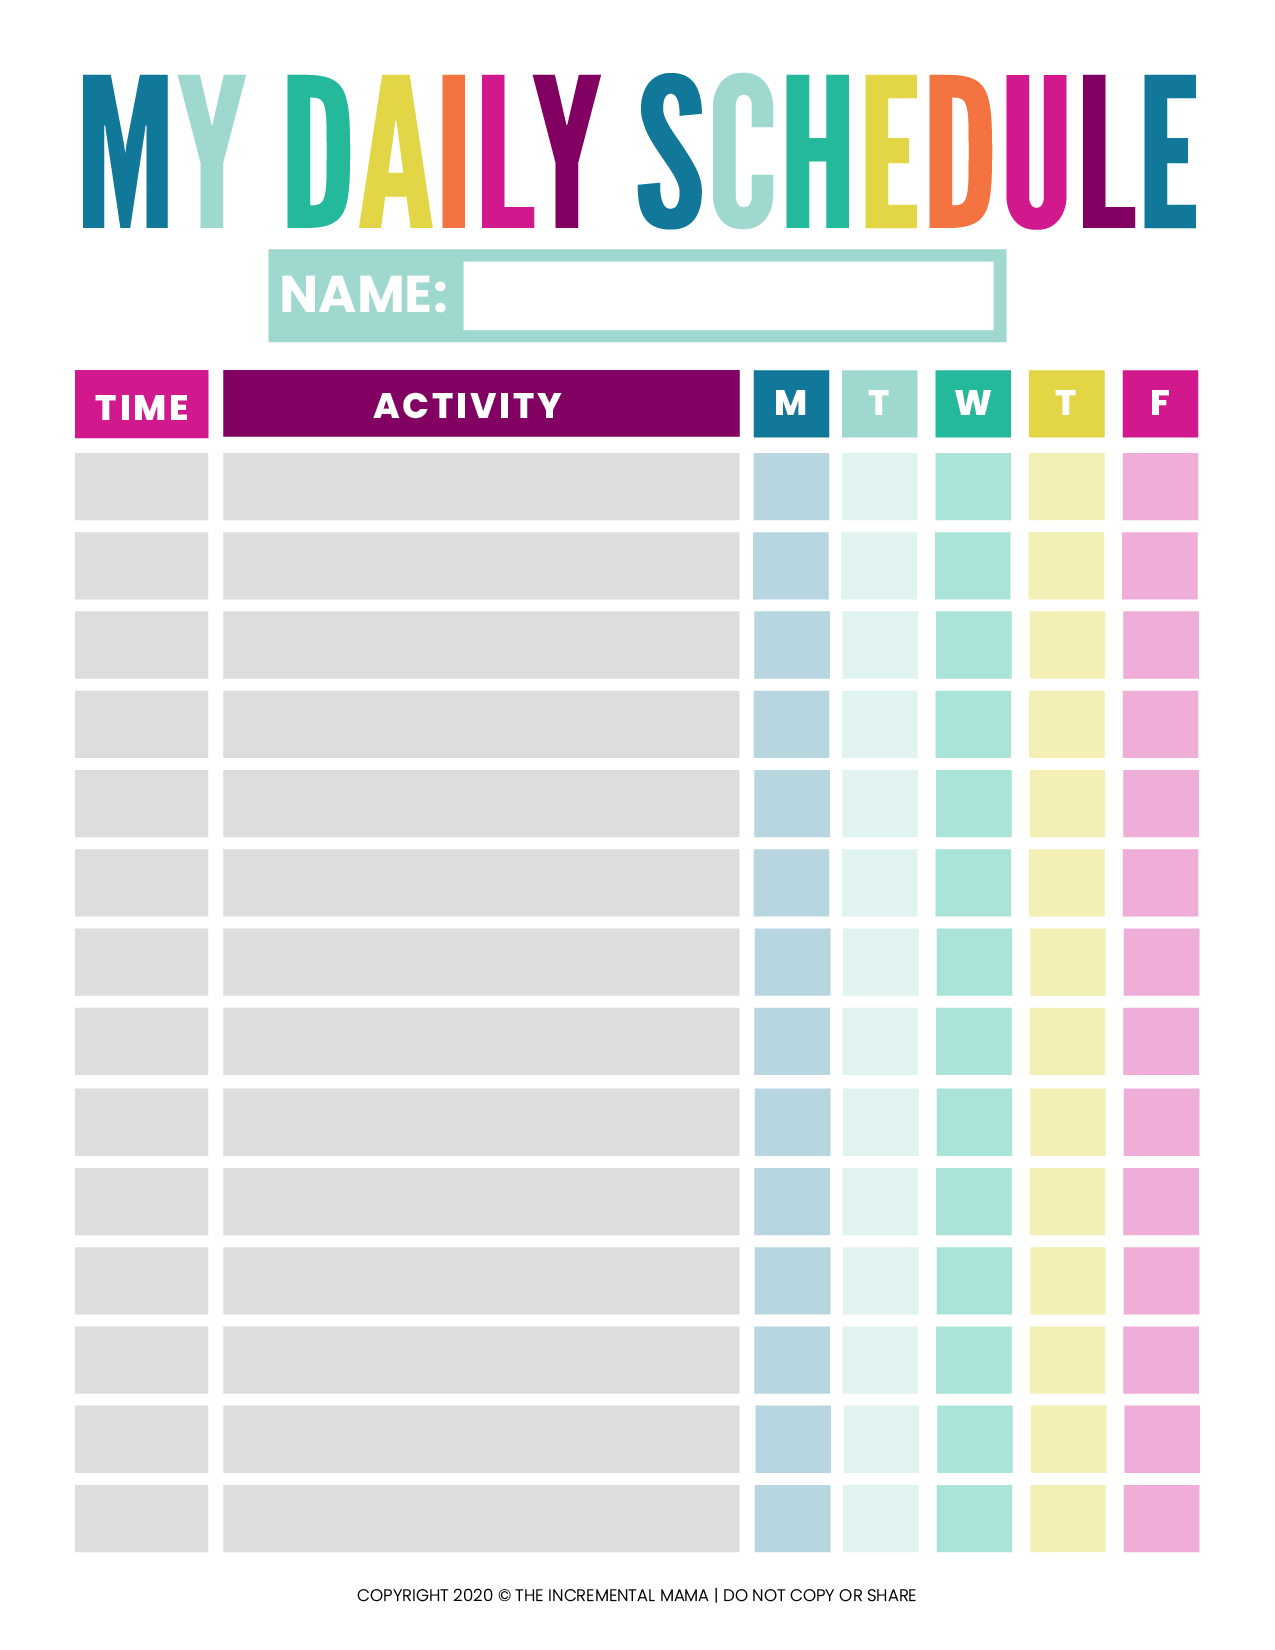 Detail Daily Schedule Template Nomer 20